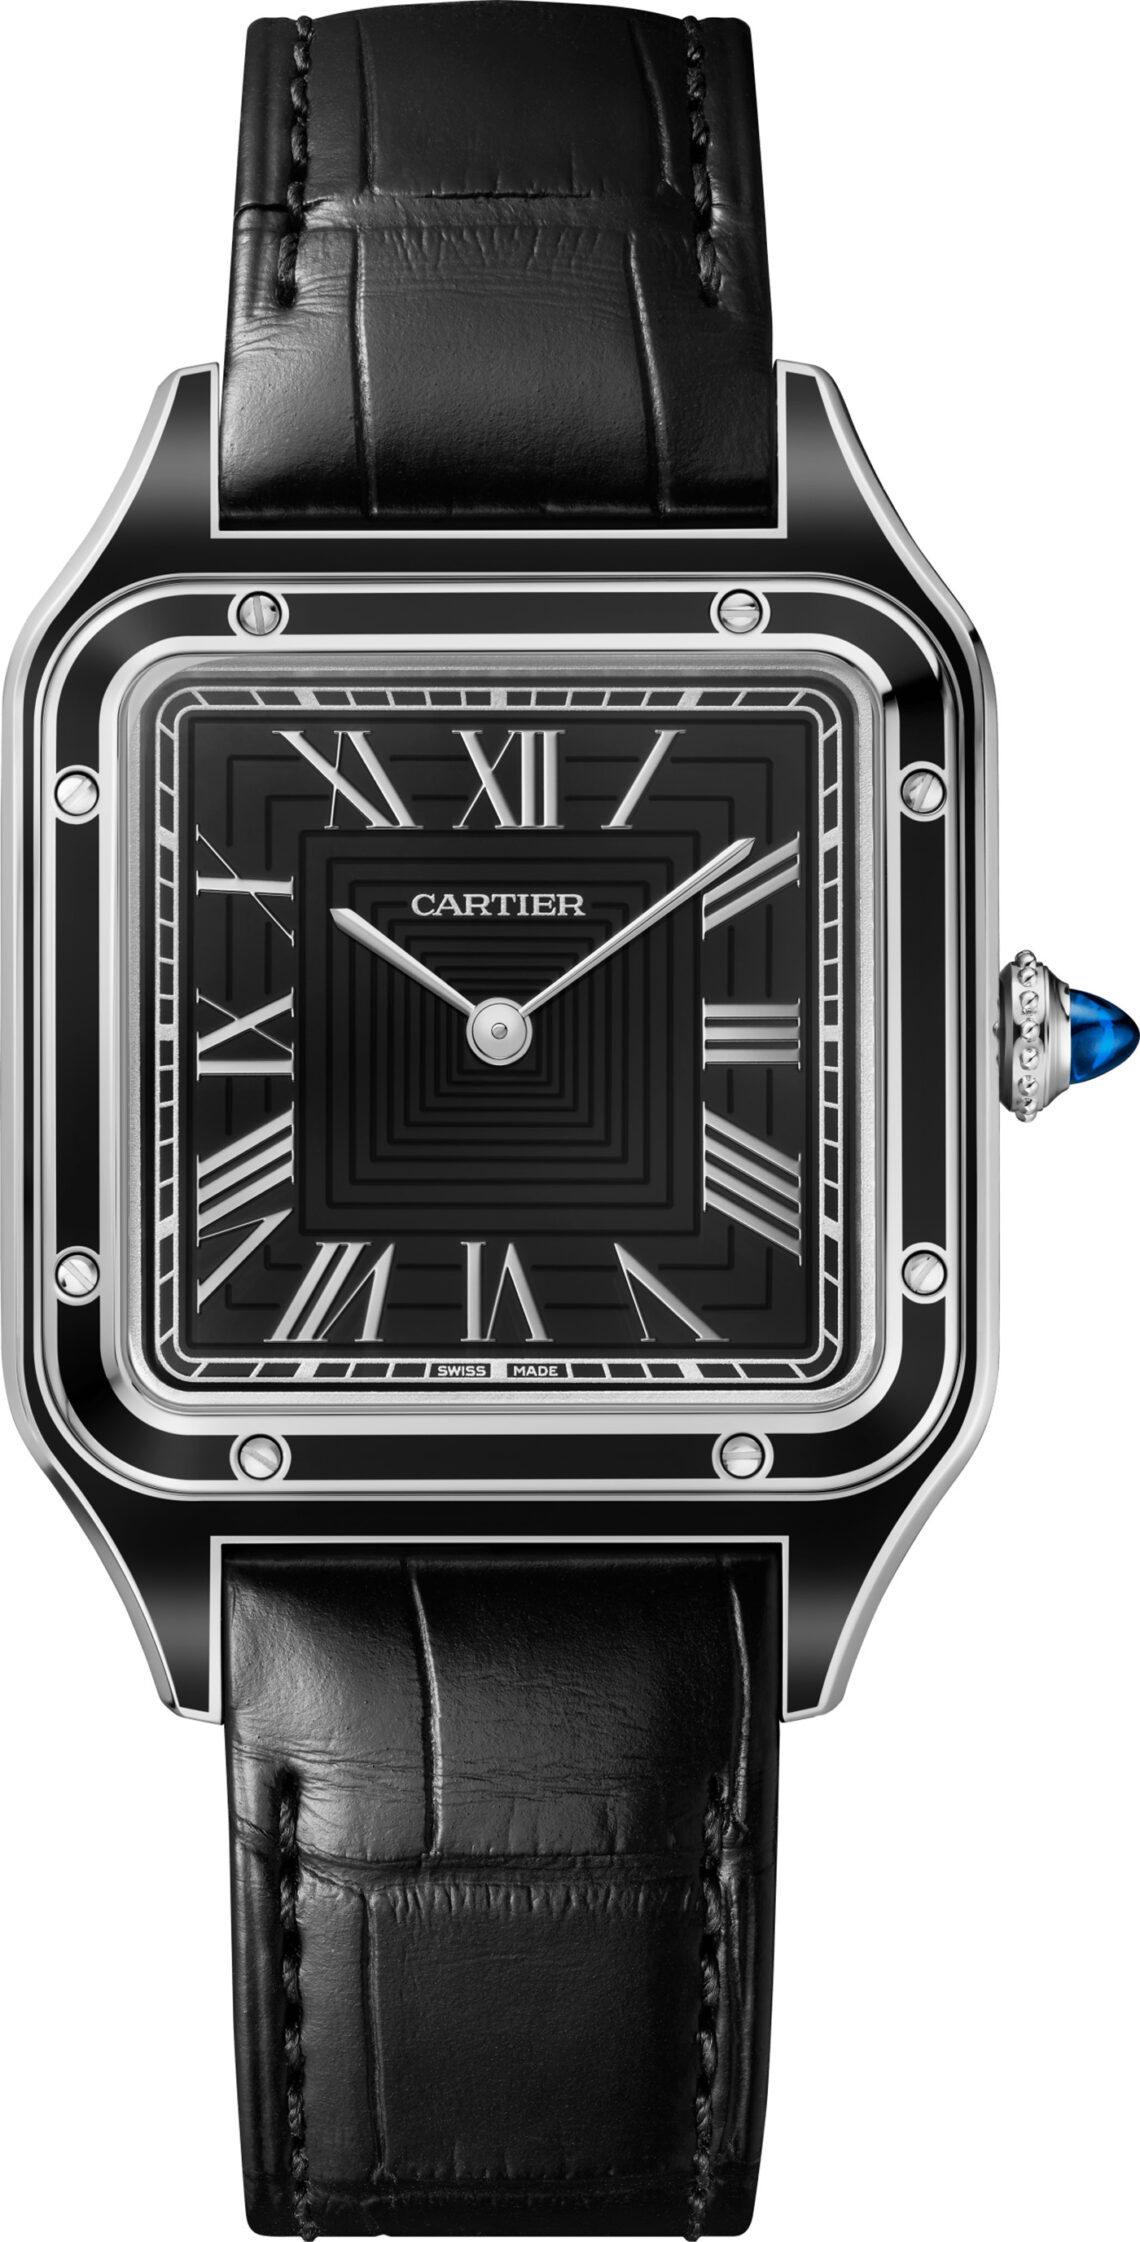 First Look: Cartier Updates The Santos-Dumont Line With Three New ...